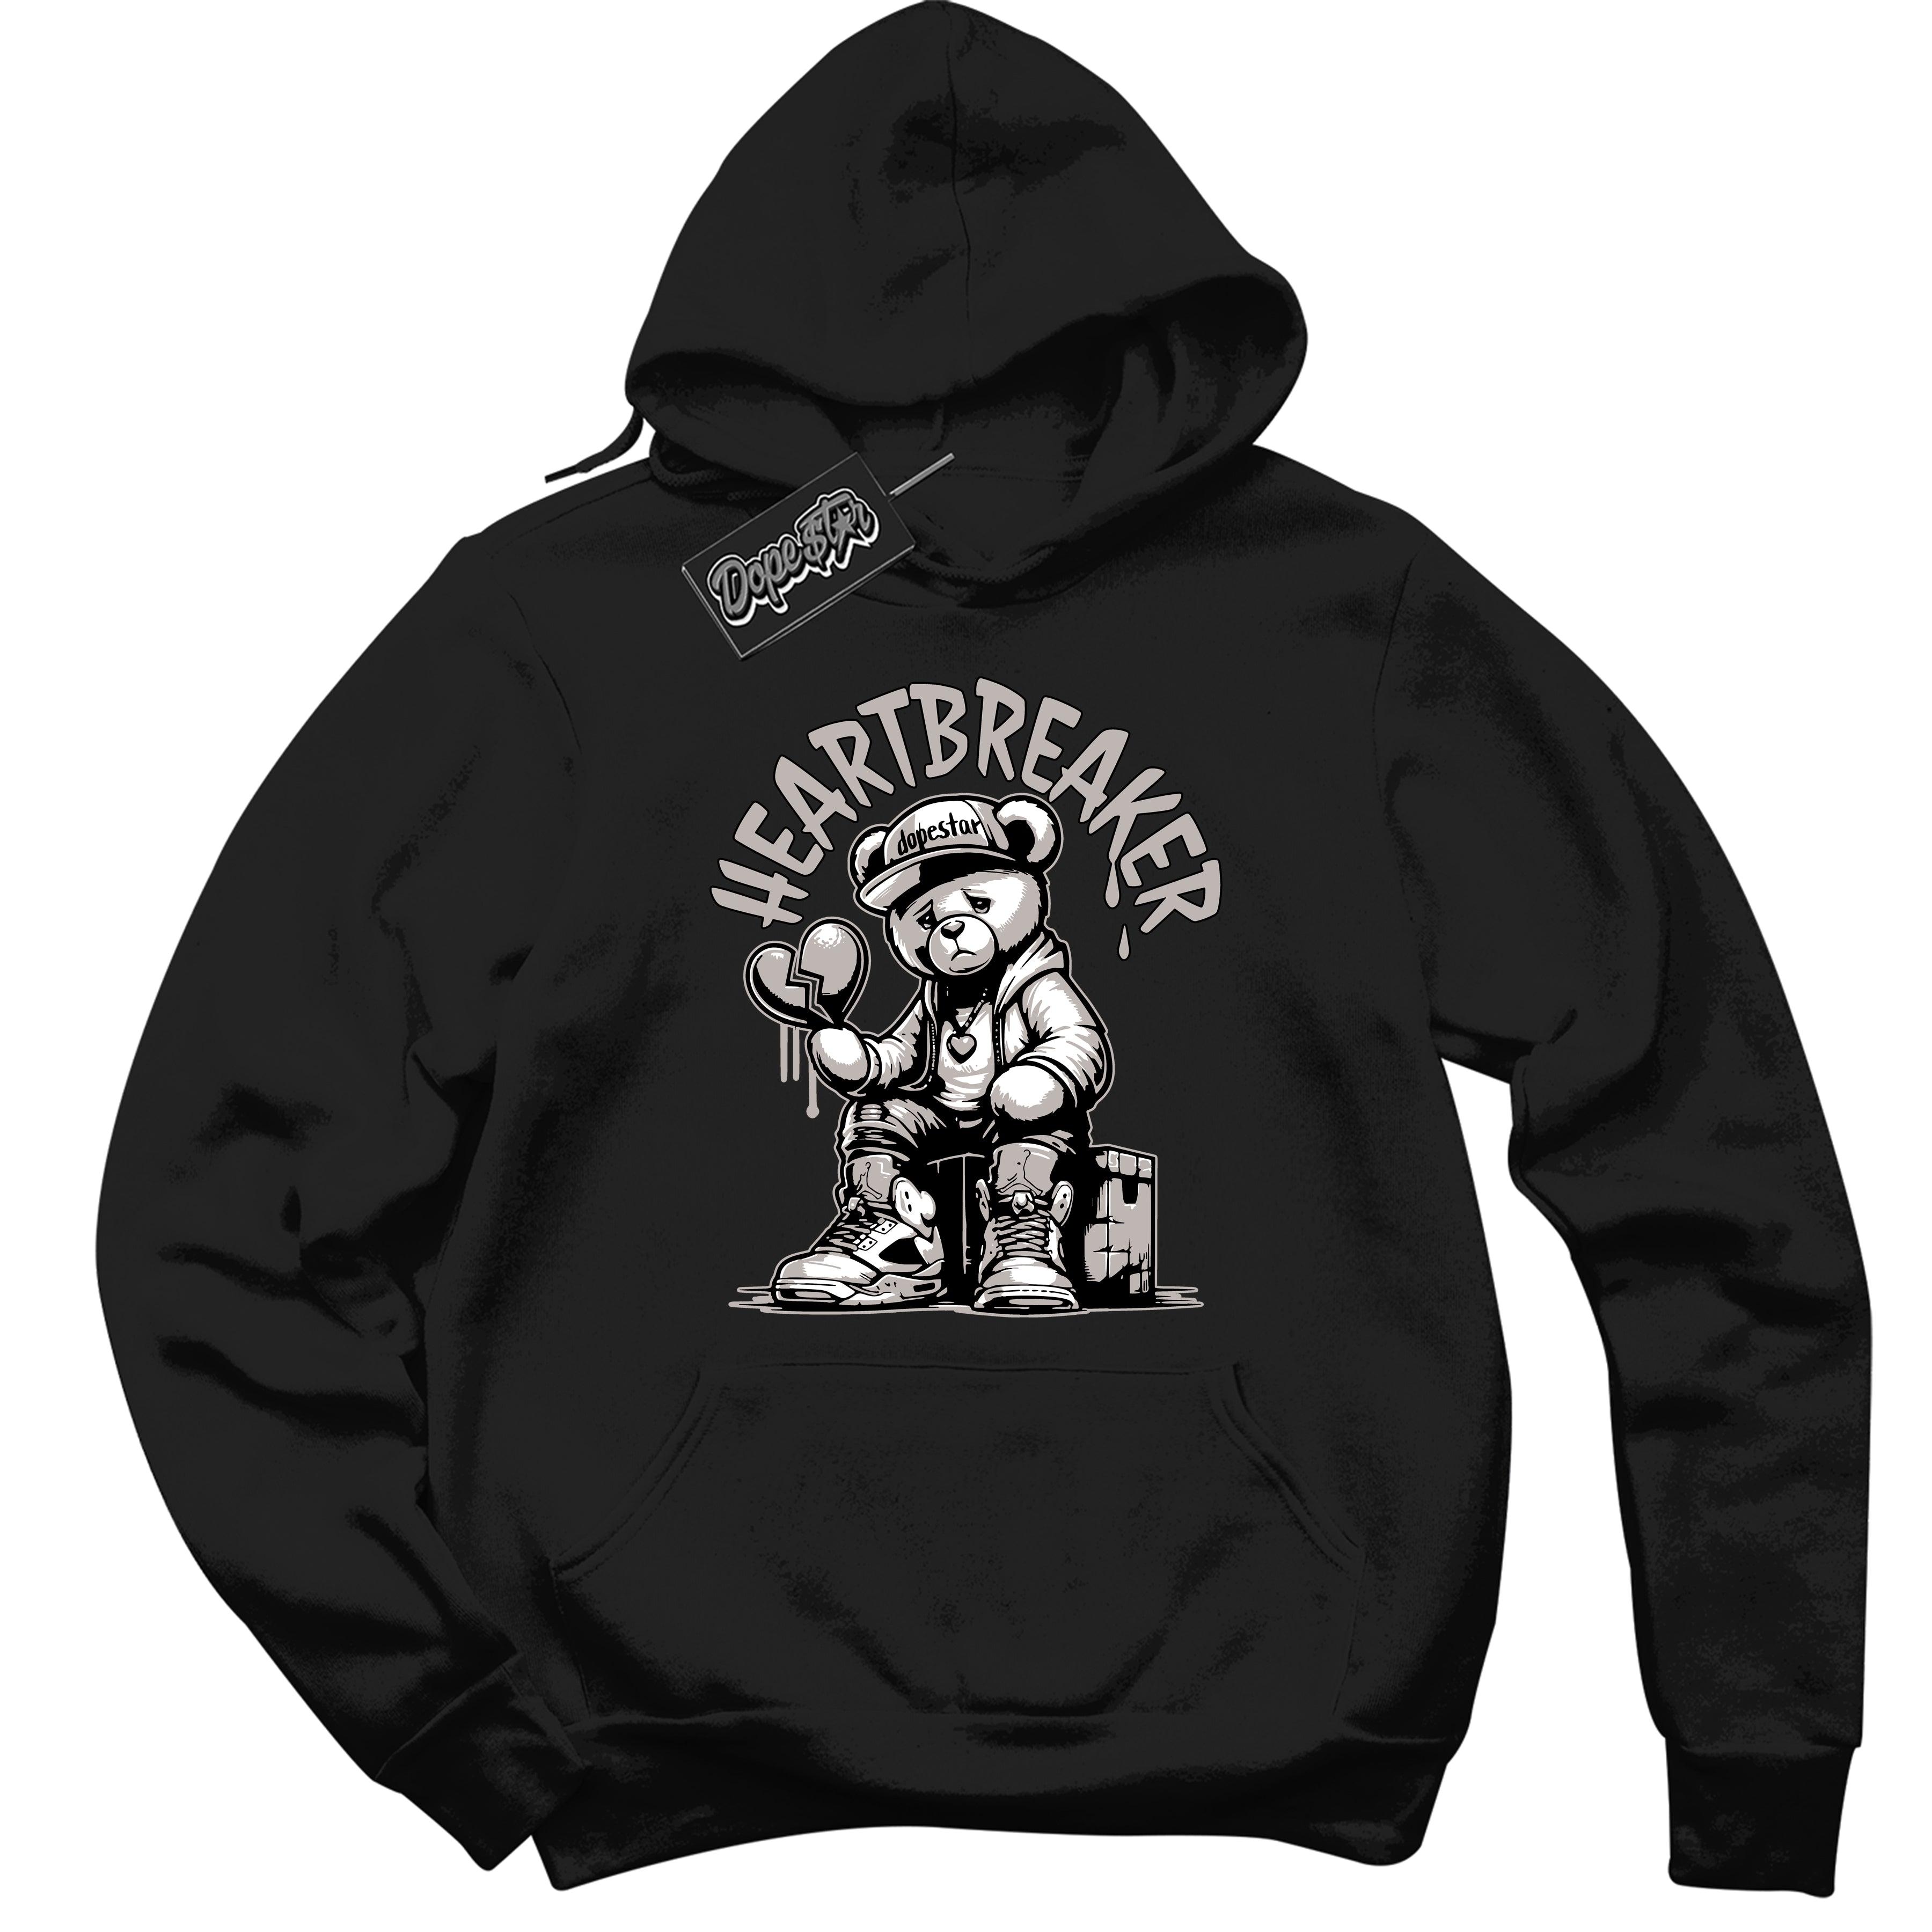 Cool Black Hoodie With Heartbreaker Bear design That Perfectly Matches AIR JORDAN 4 RETRO MILITARY BLACK Sneakers